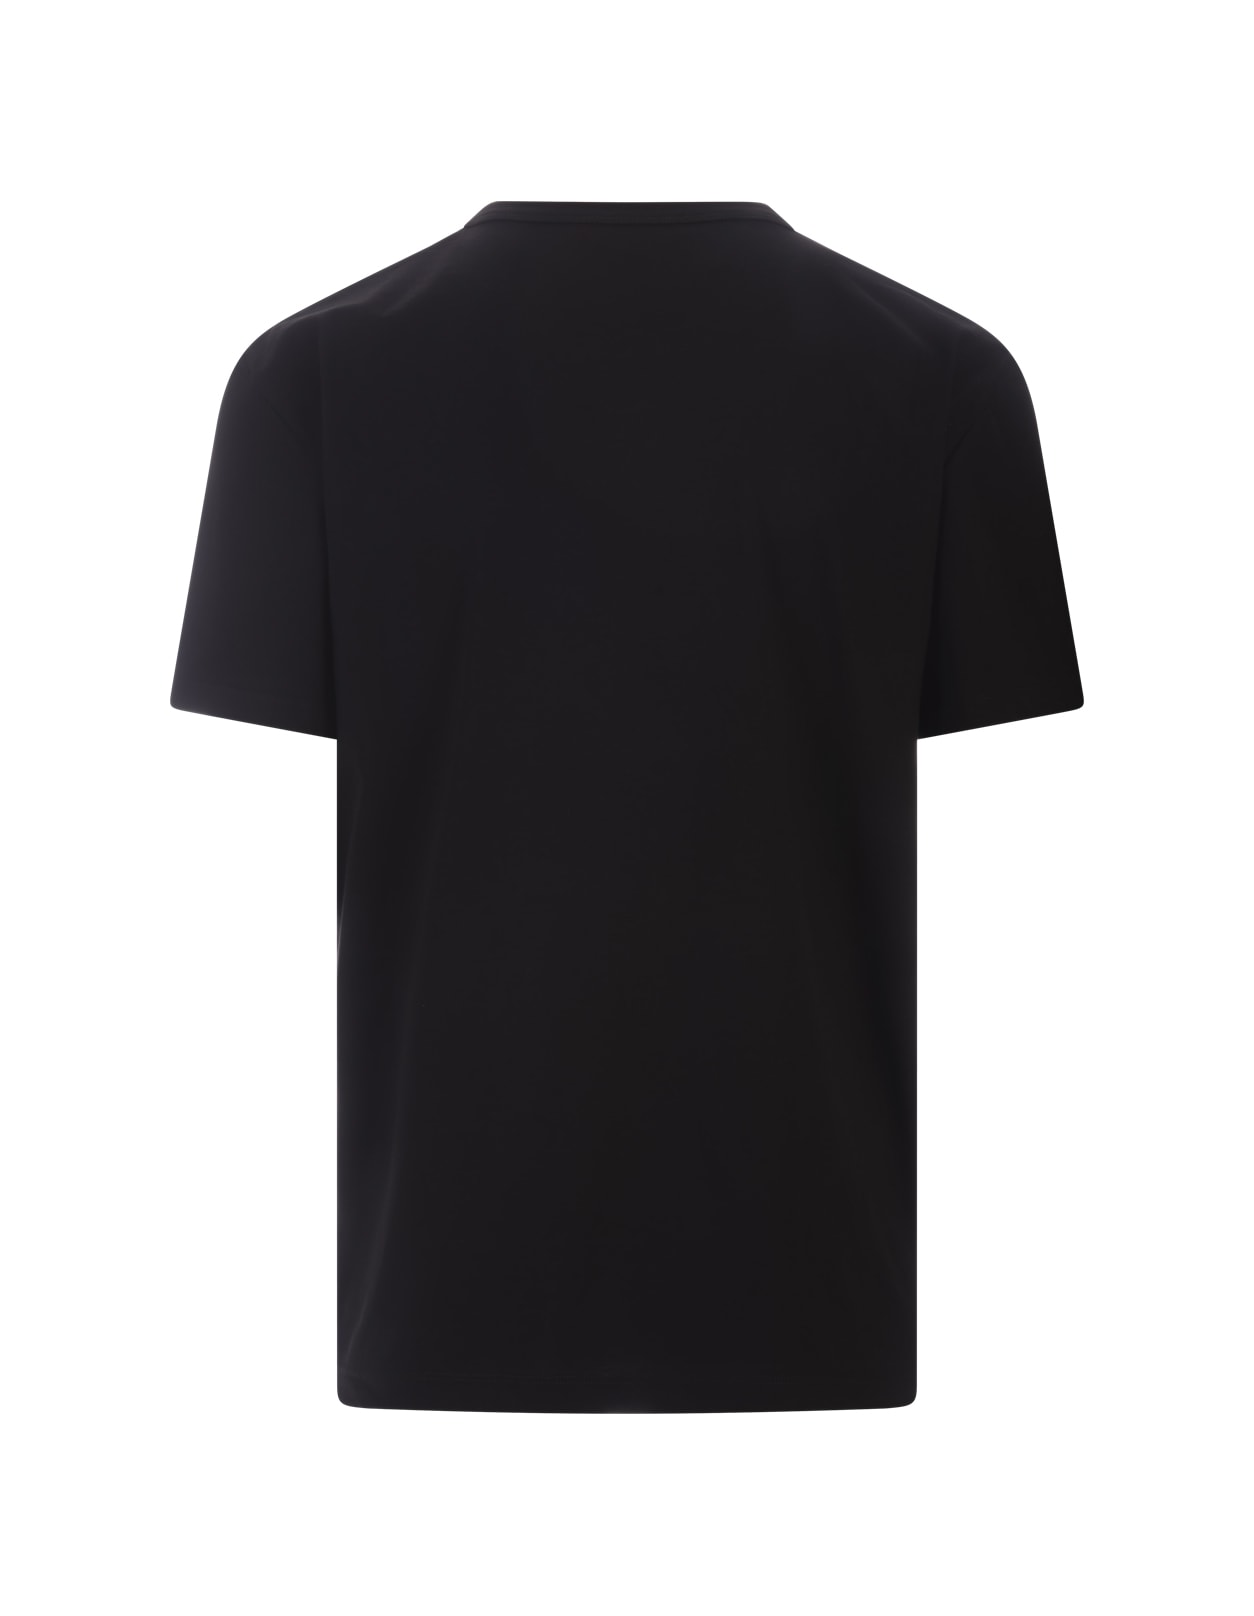 Shop Alexander Mcqueen Black T-shirt With Enlarged Charm Print